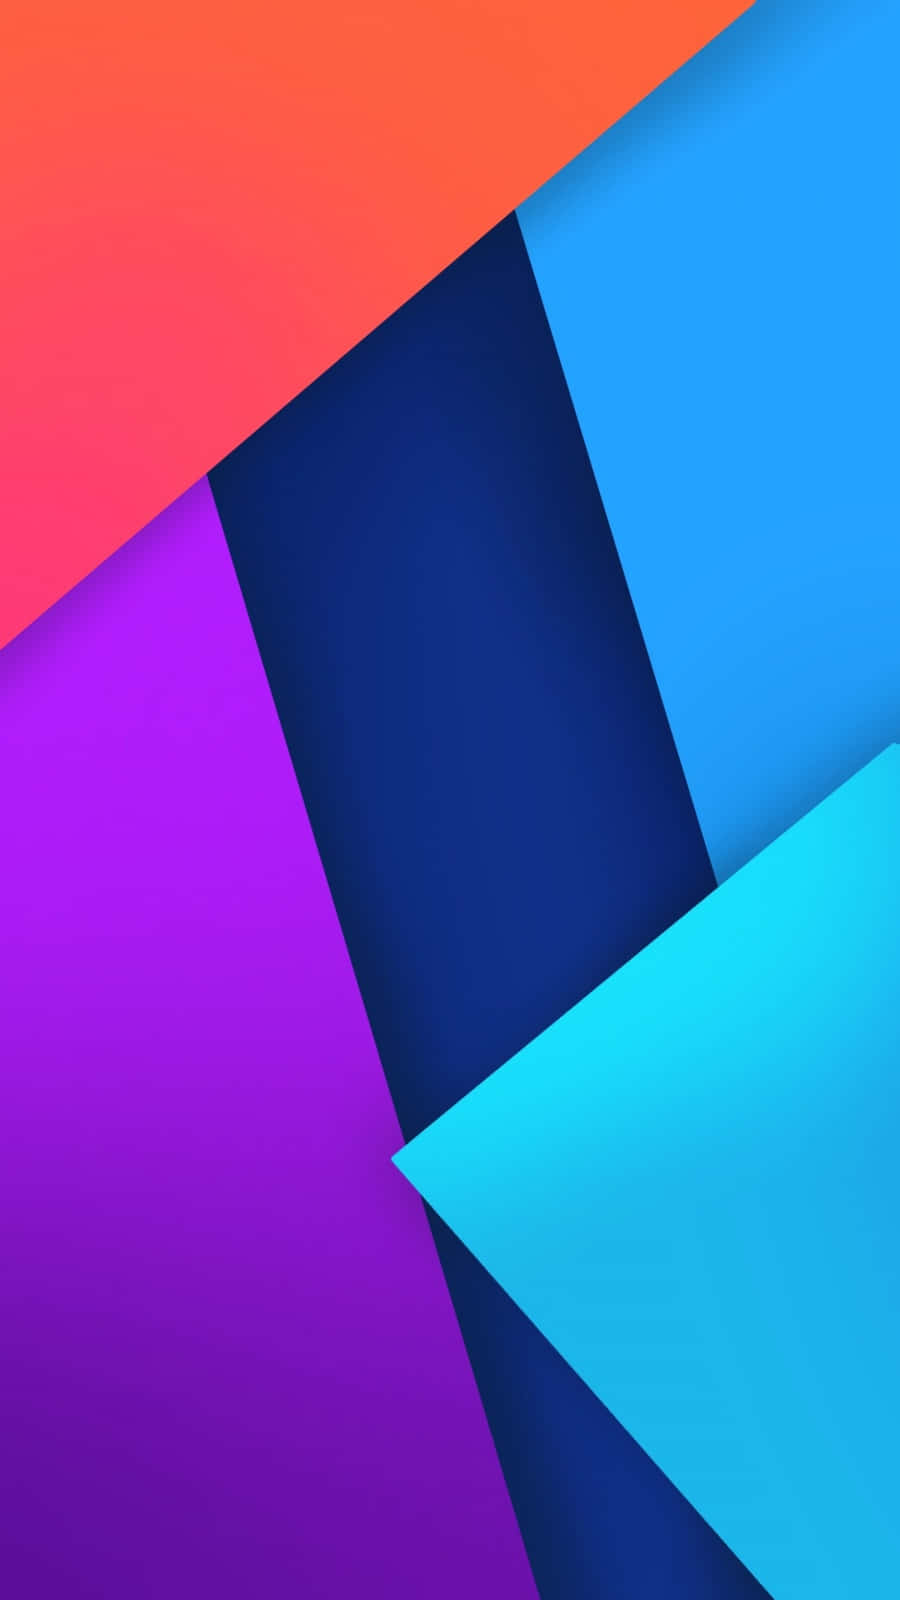 Keep your tech game on point with this stylish Geometric Iphone. Wallpaper